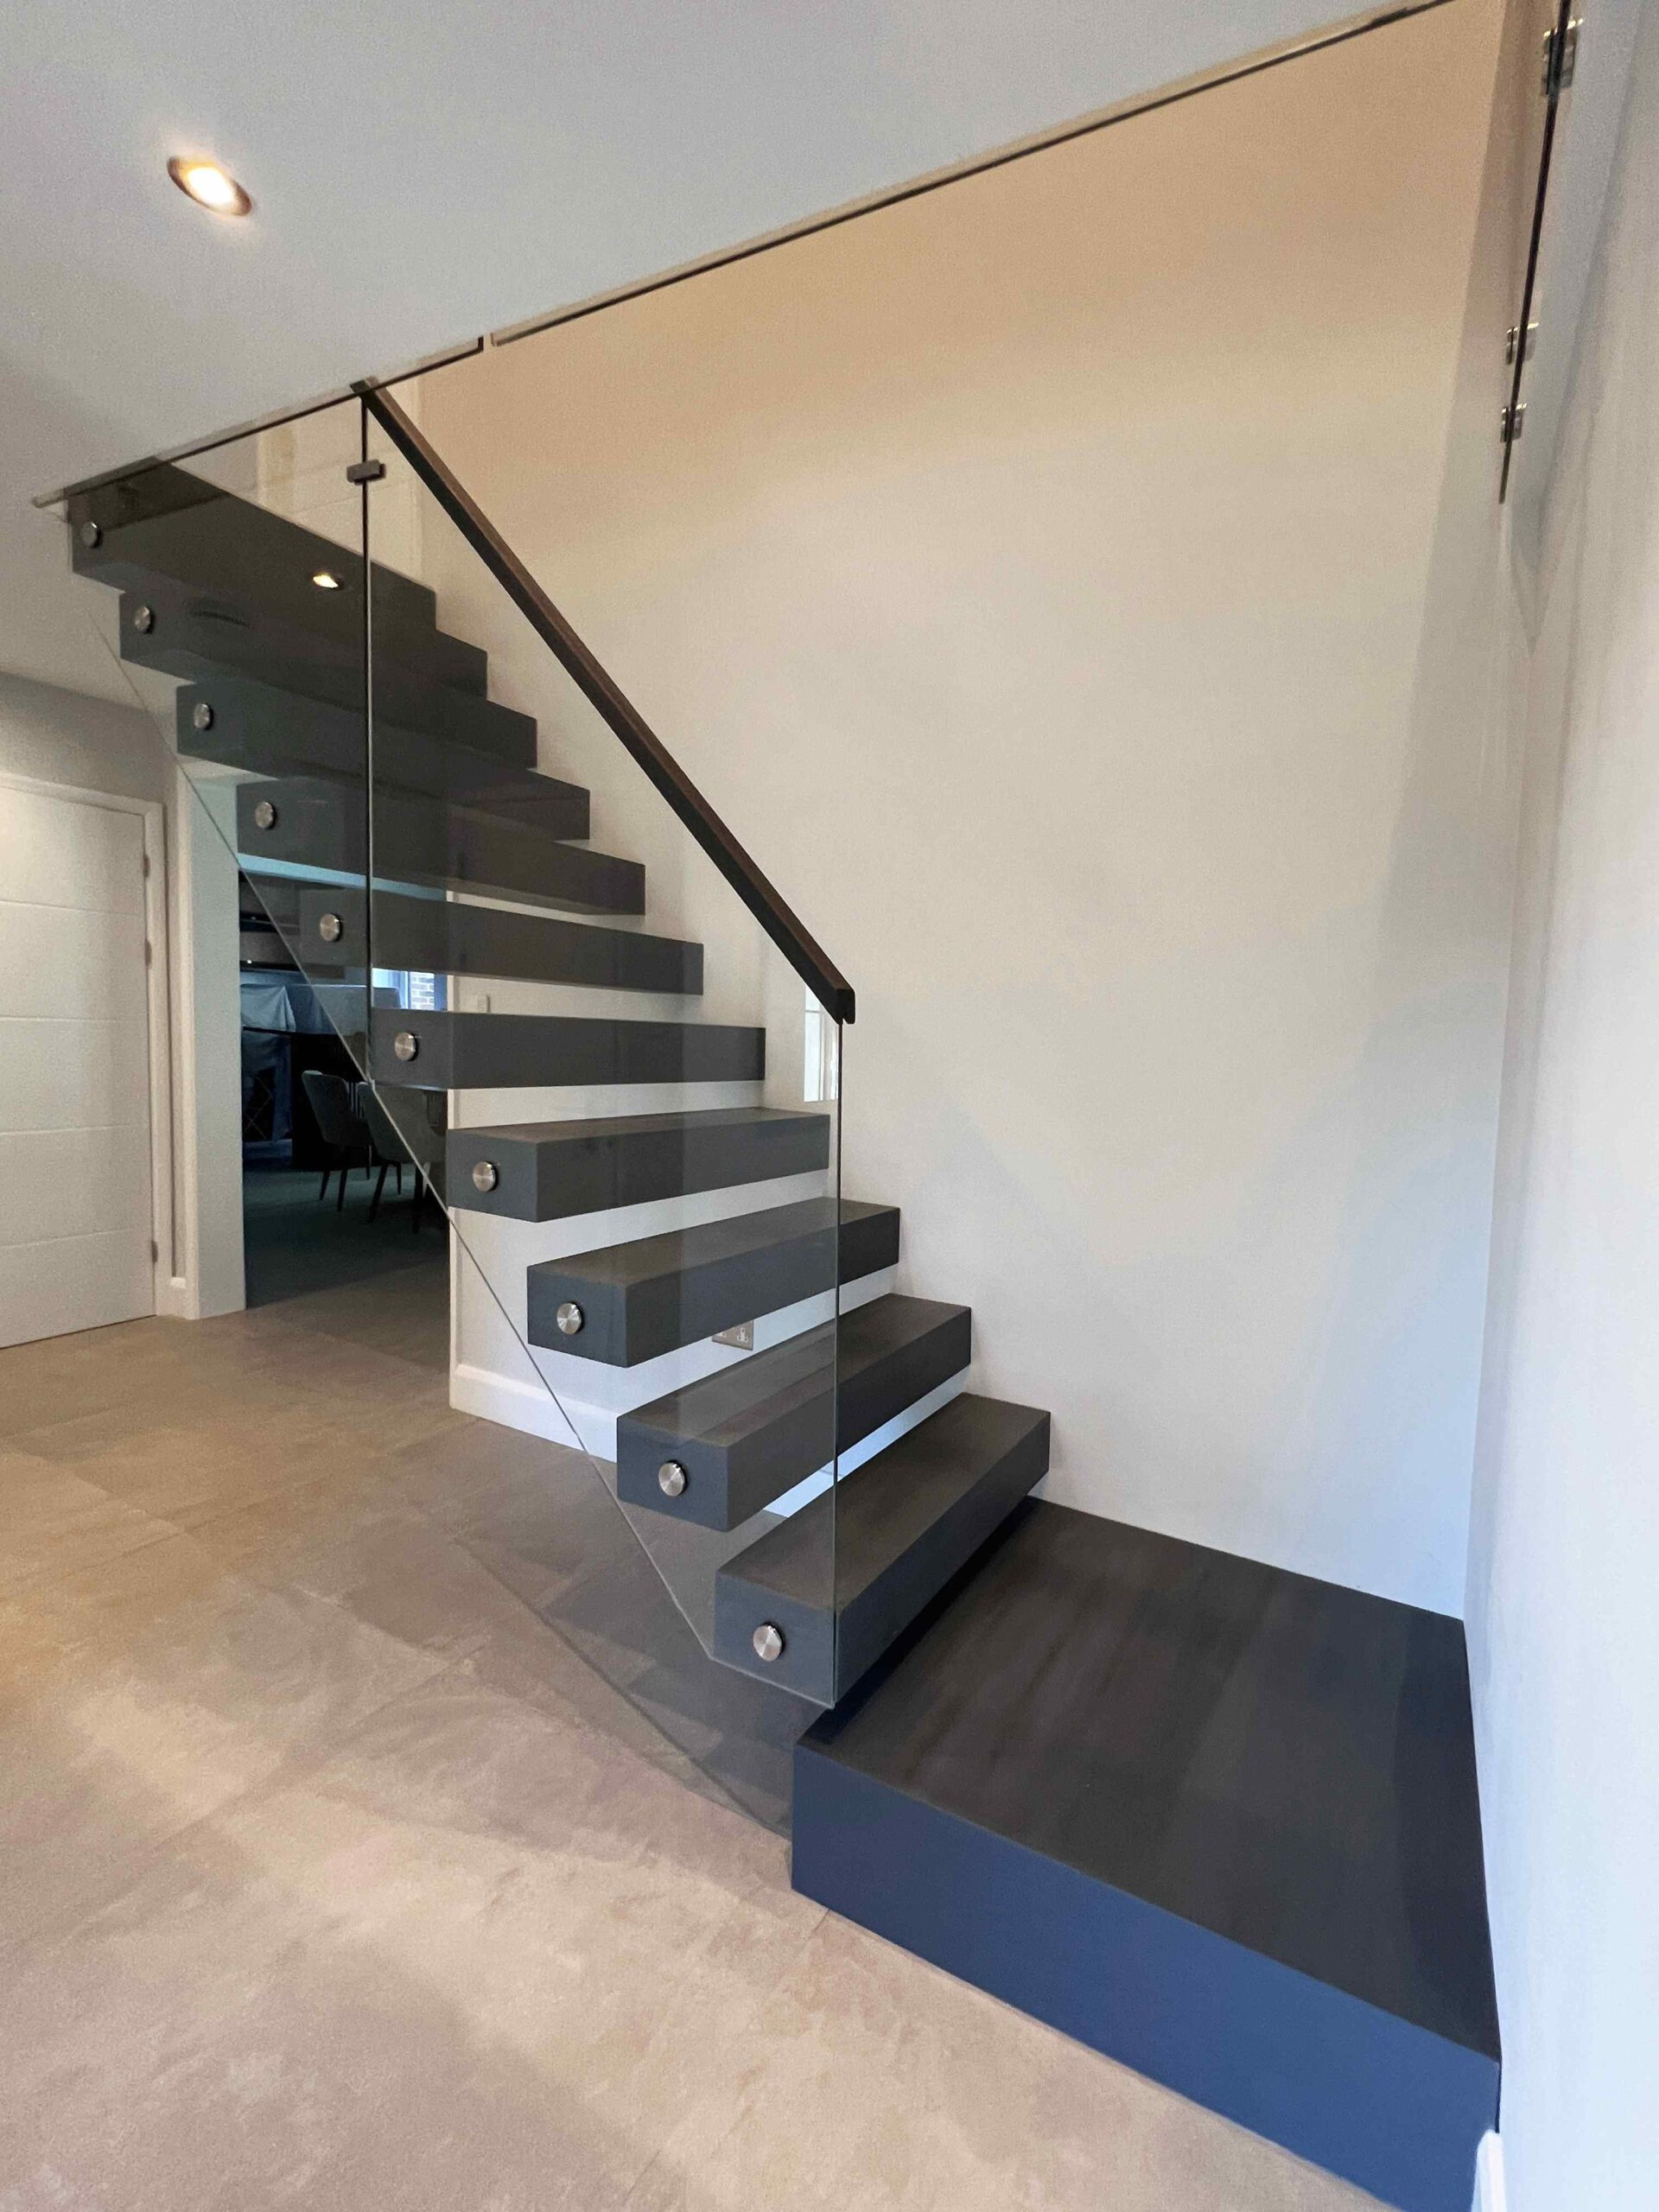 Floating staircase complemented with glass balustrade and black oak stair treads.